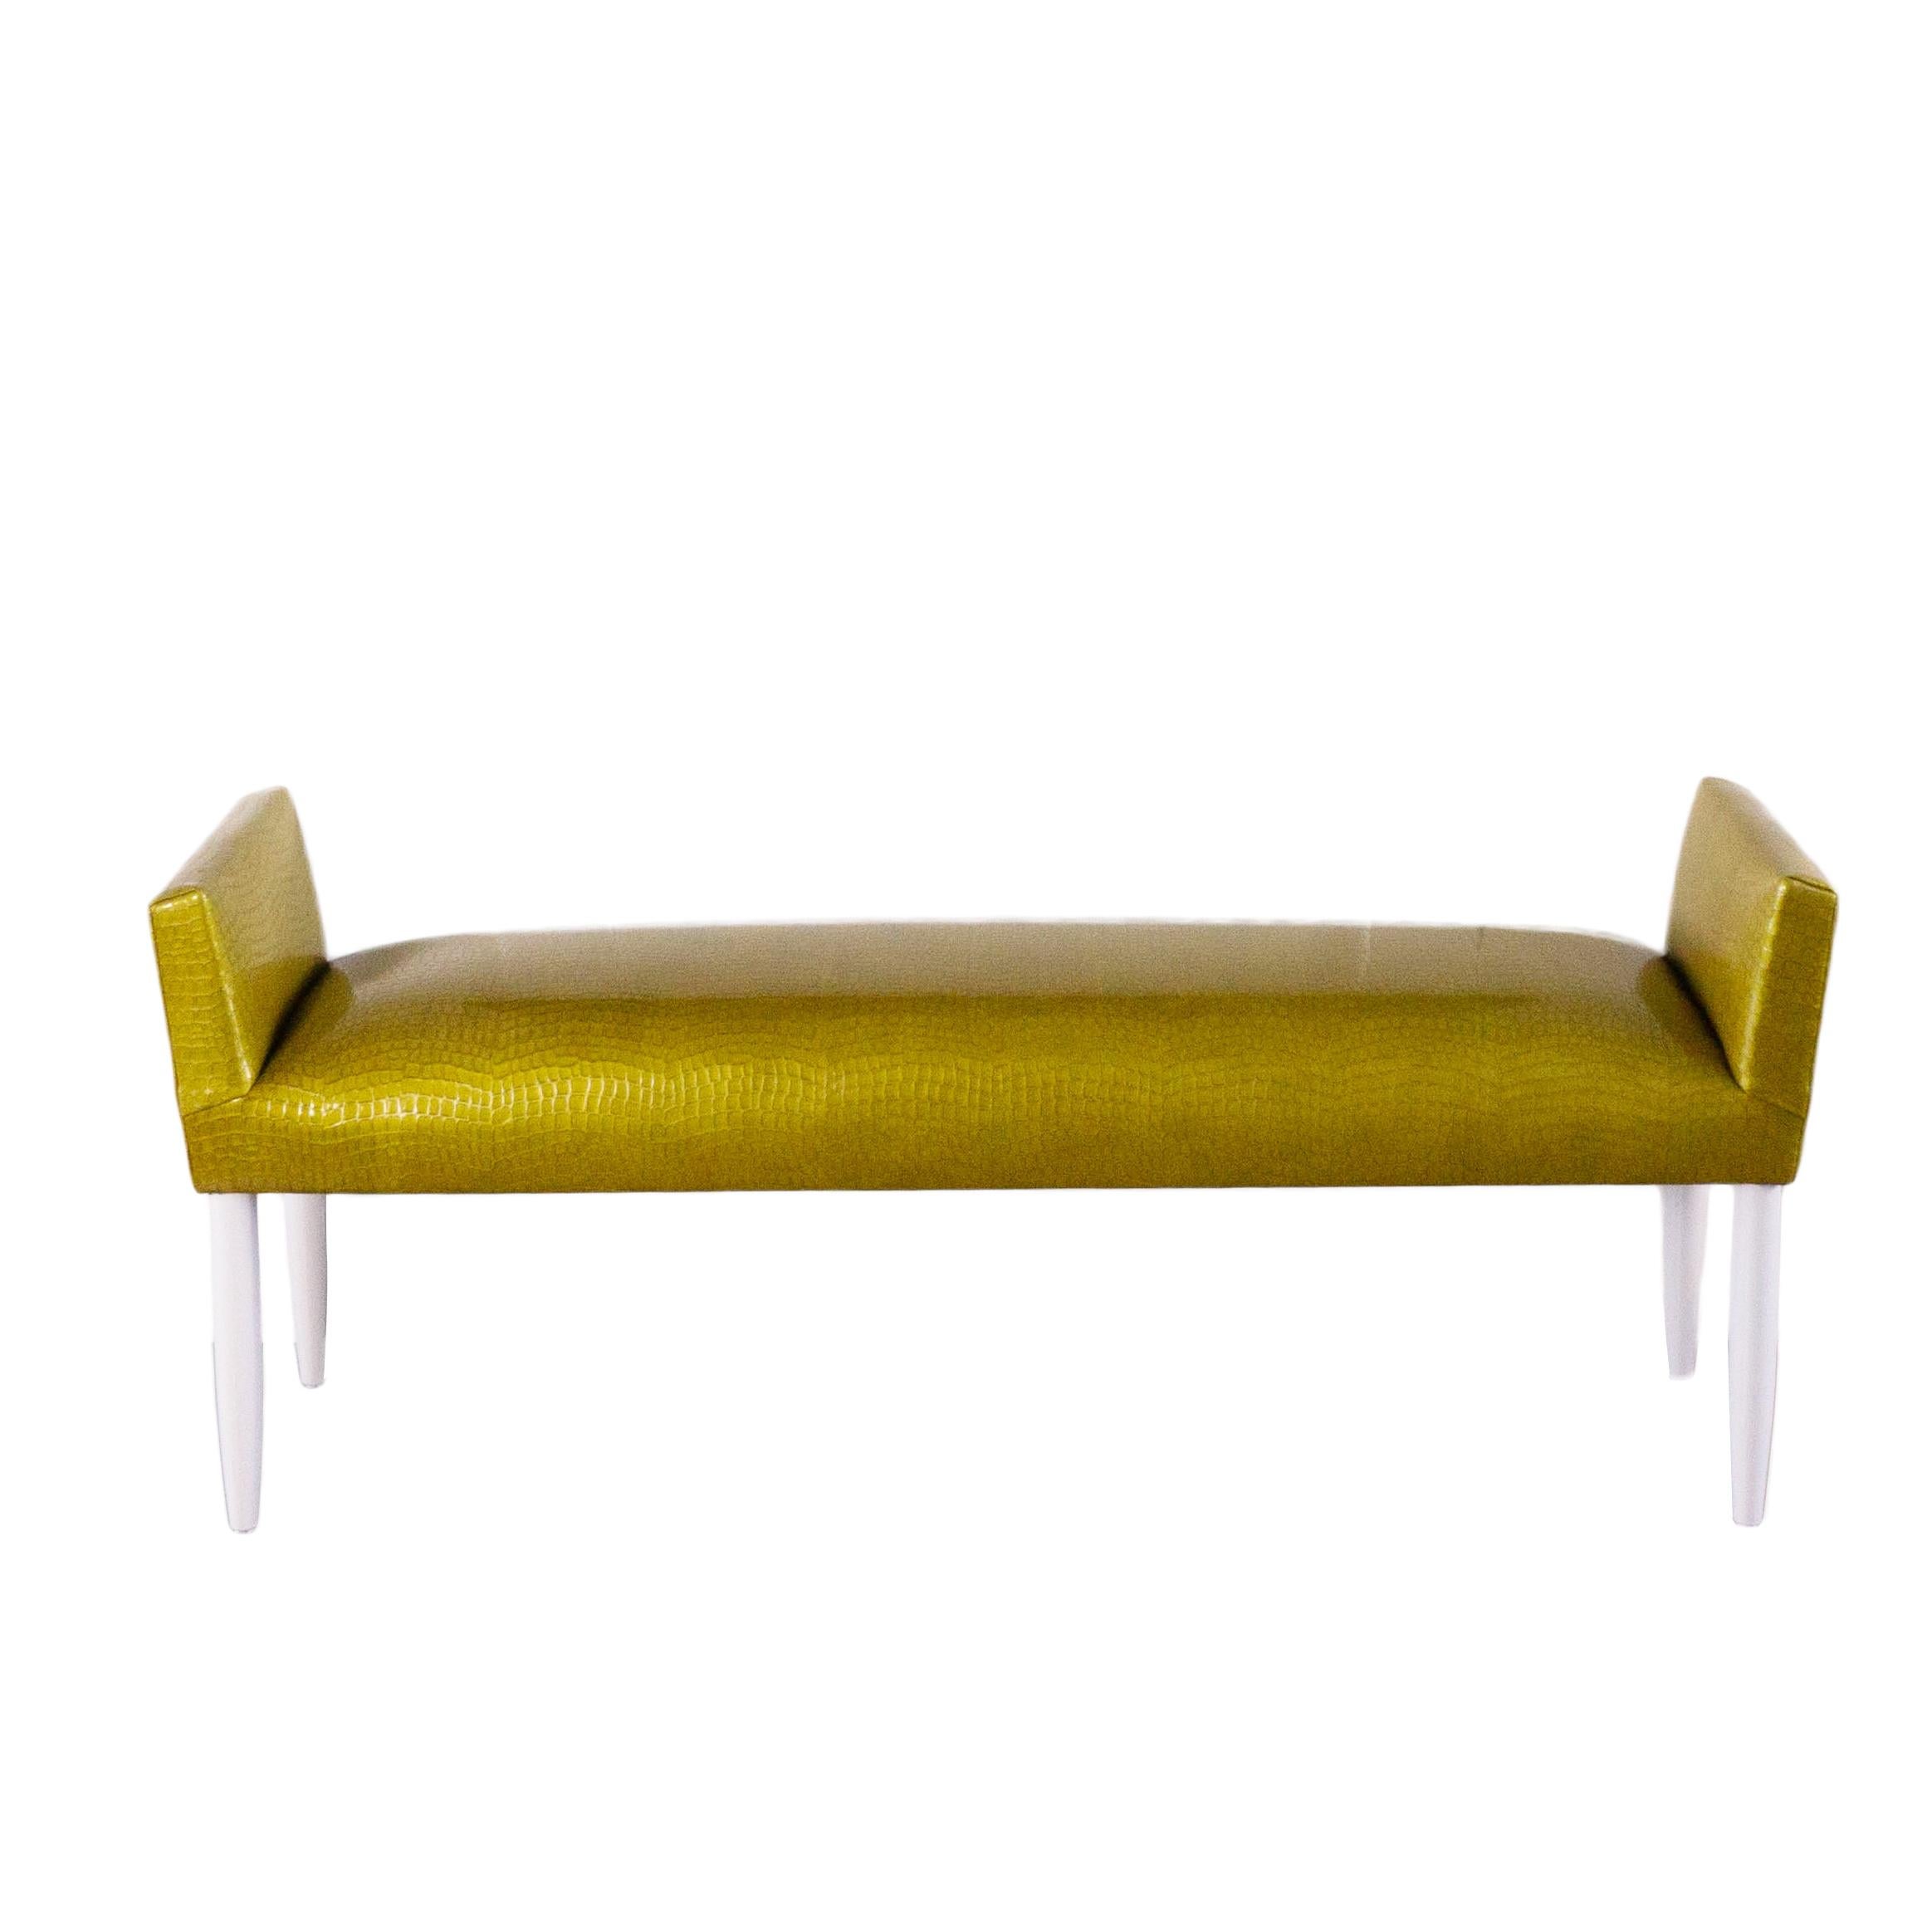 American Mid-Century Modern Tight Cushioned Accent Bench For Sale